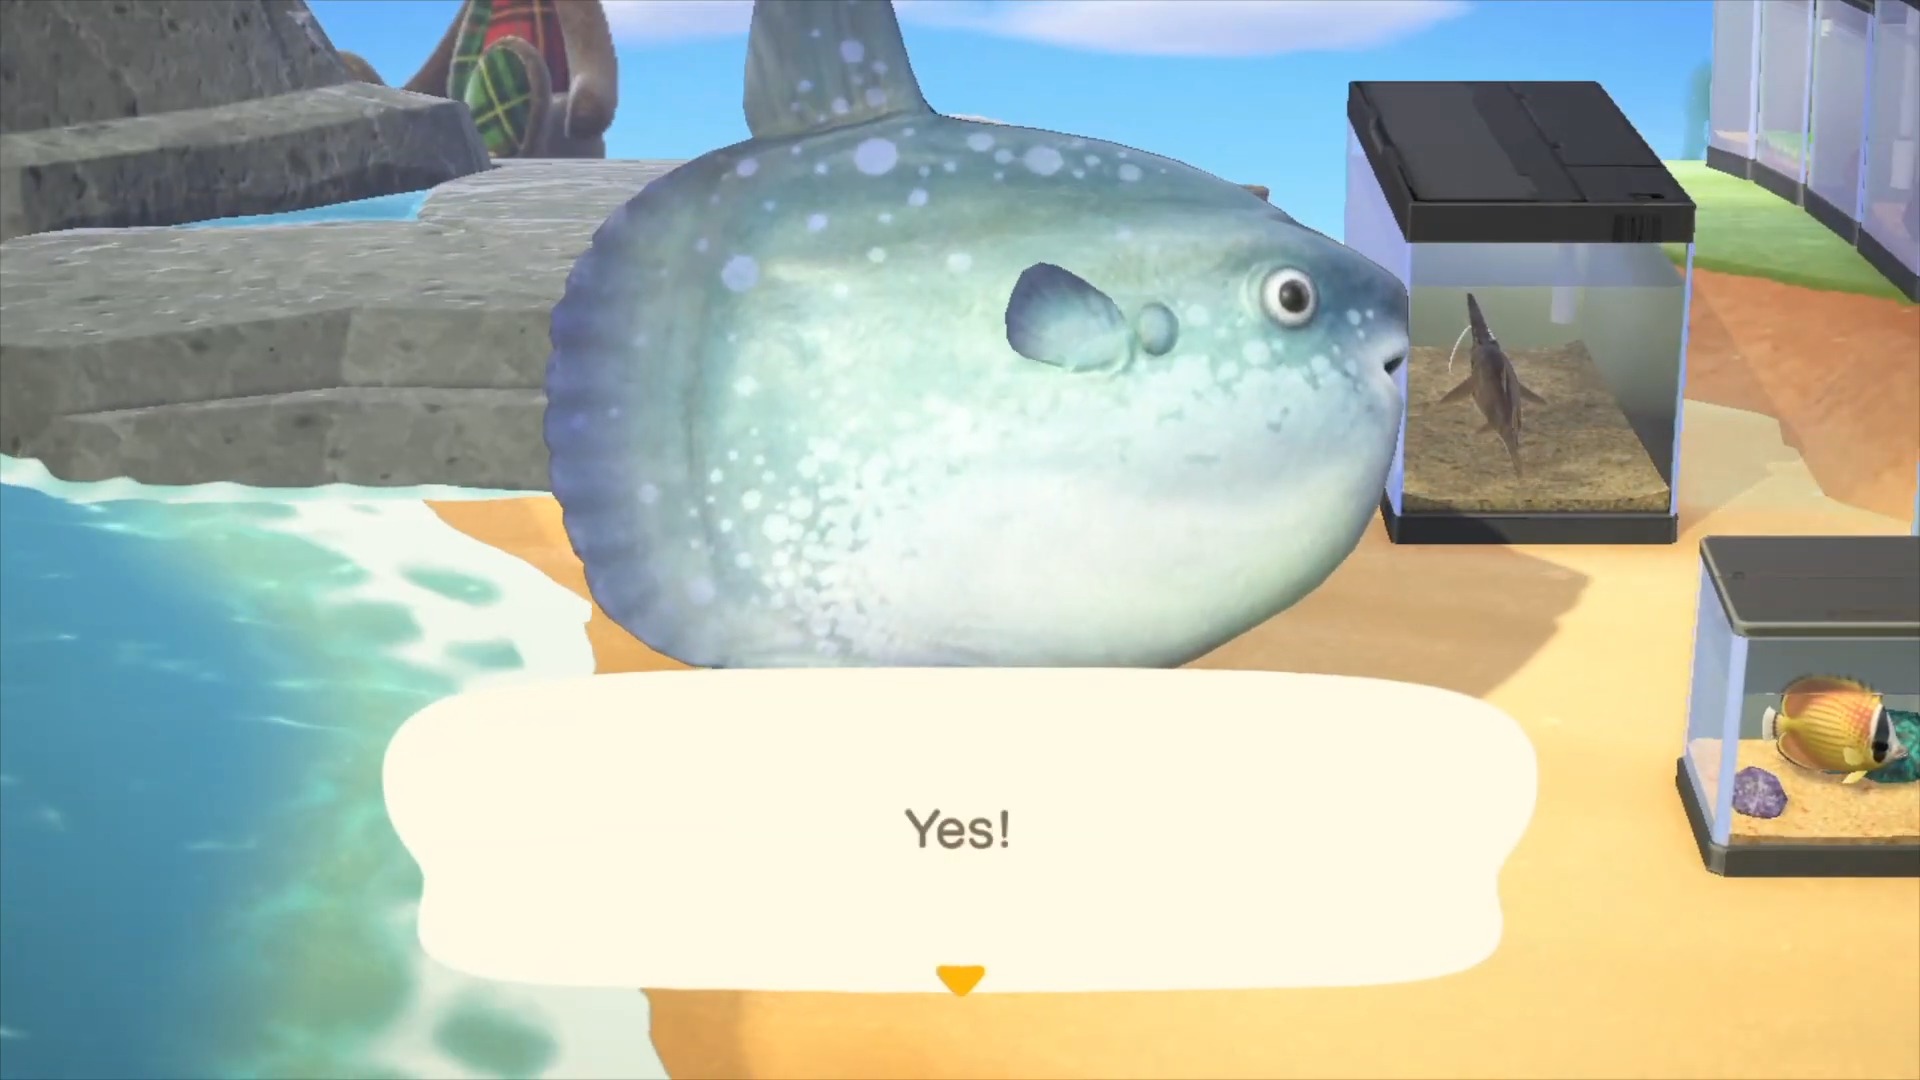 July Fish And Bug Guide For Animal Crossing: New Horizons – All-New Critters And How To Catch Them